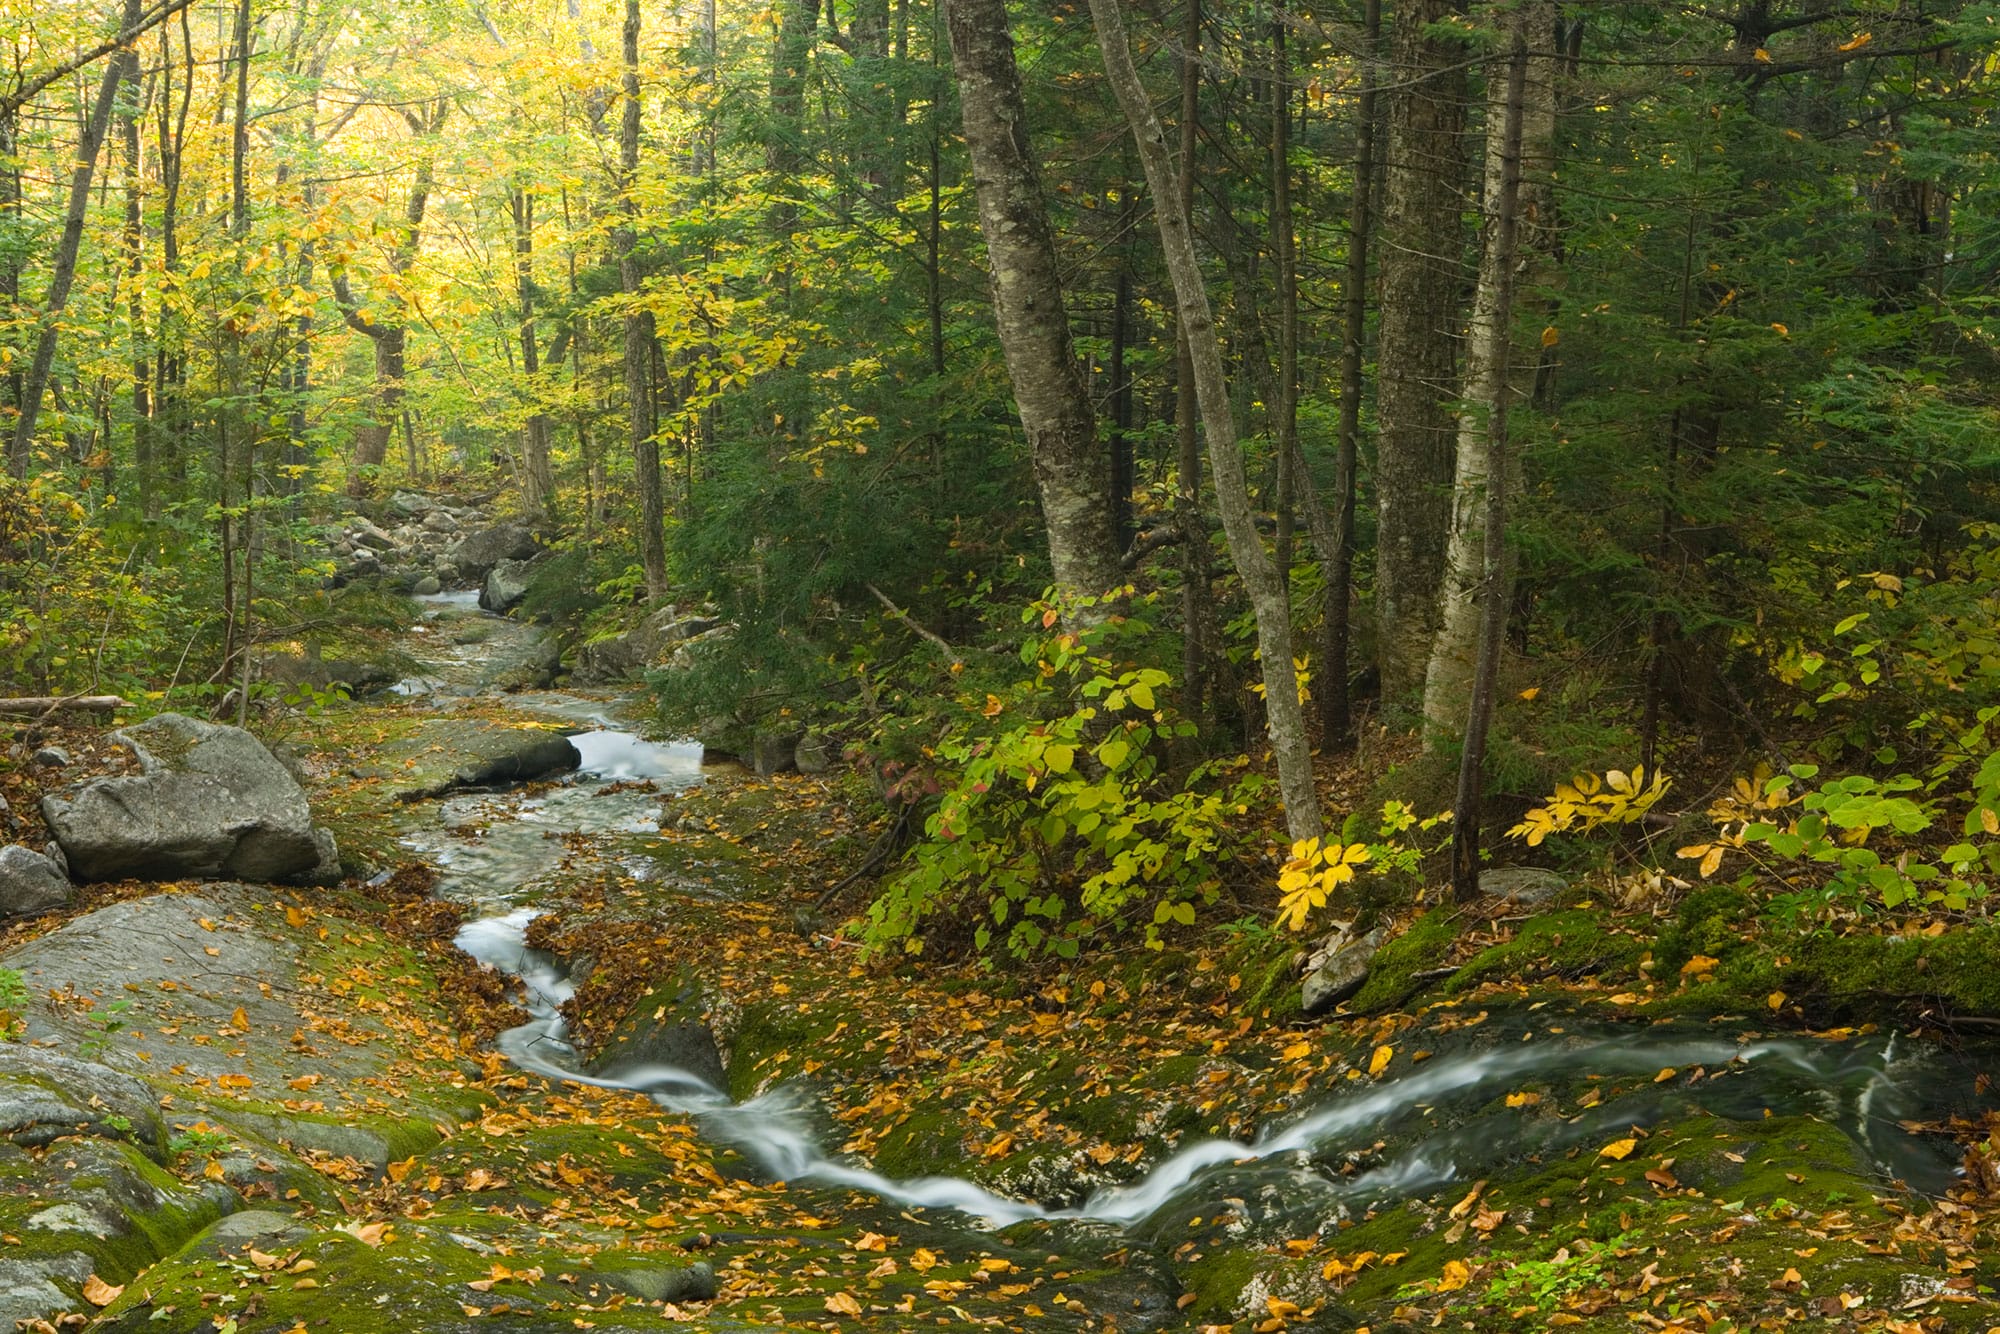 A stream surrounded by trees and leaves in a wooded area.